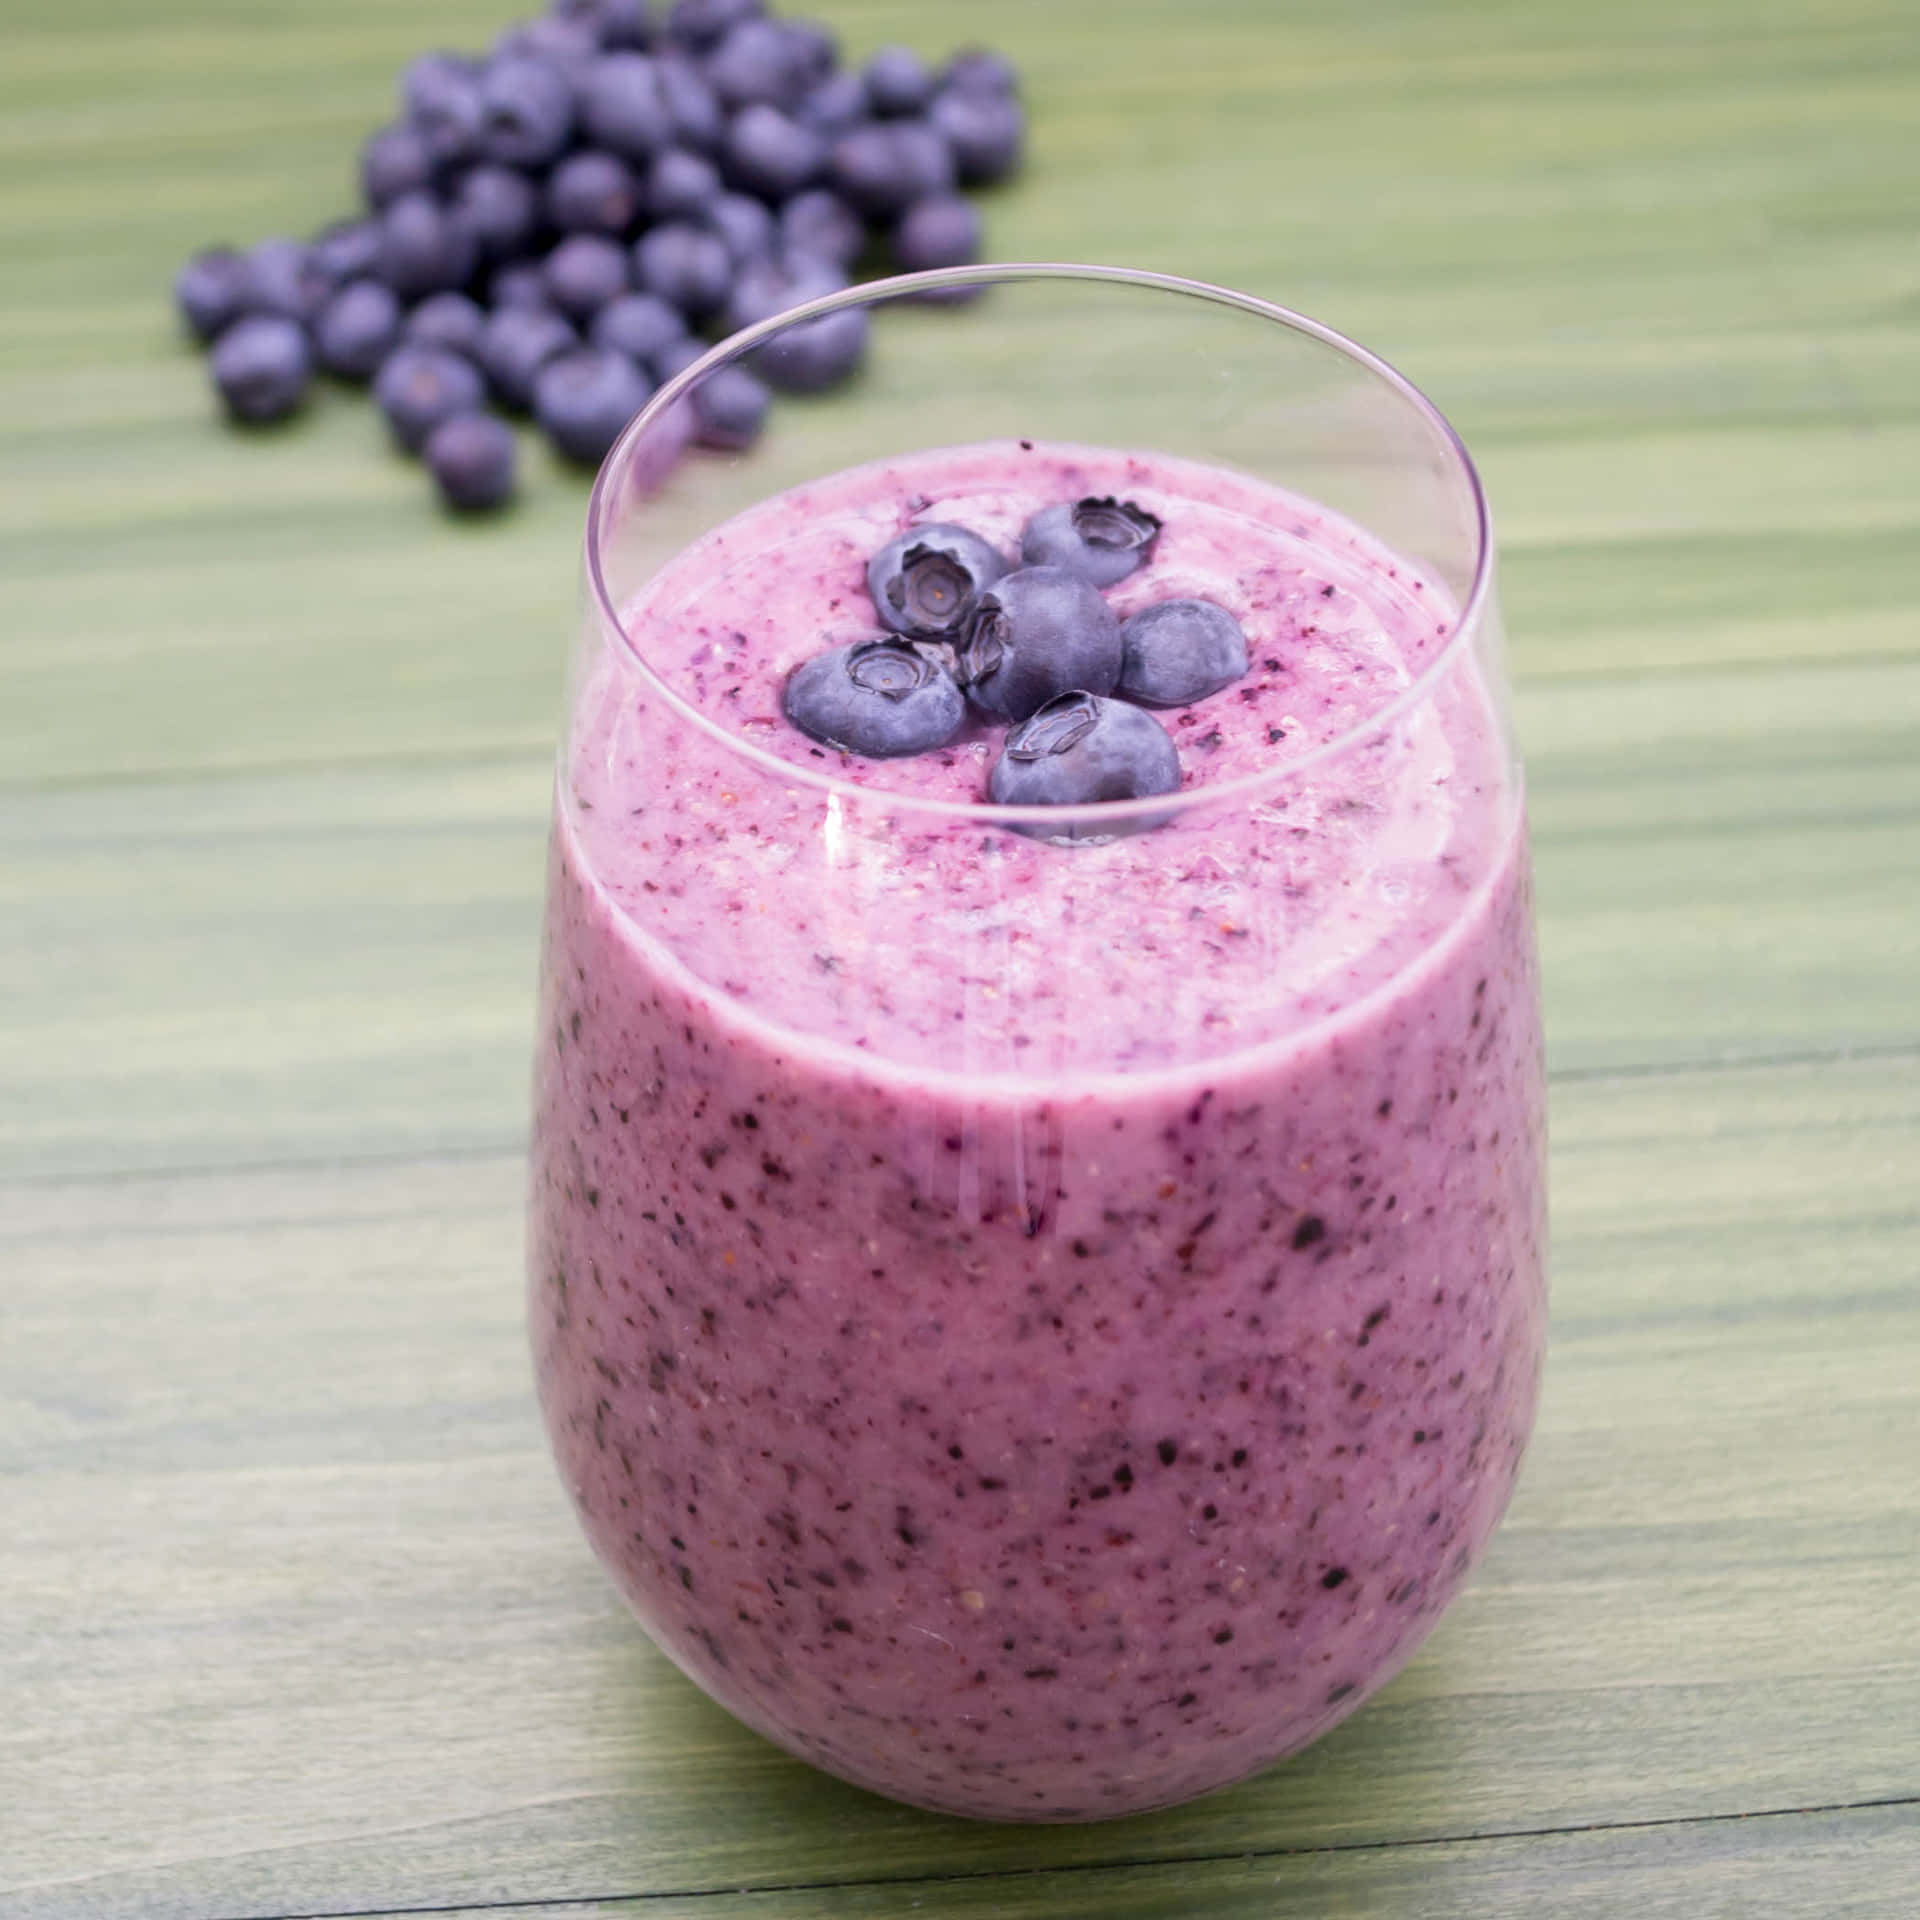 Enjoy a delicious Blueberry Smoothie and start your day with a burst of flavor! Wallpaper